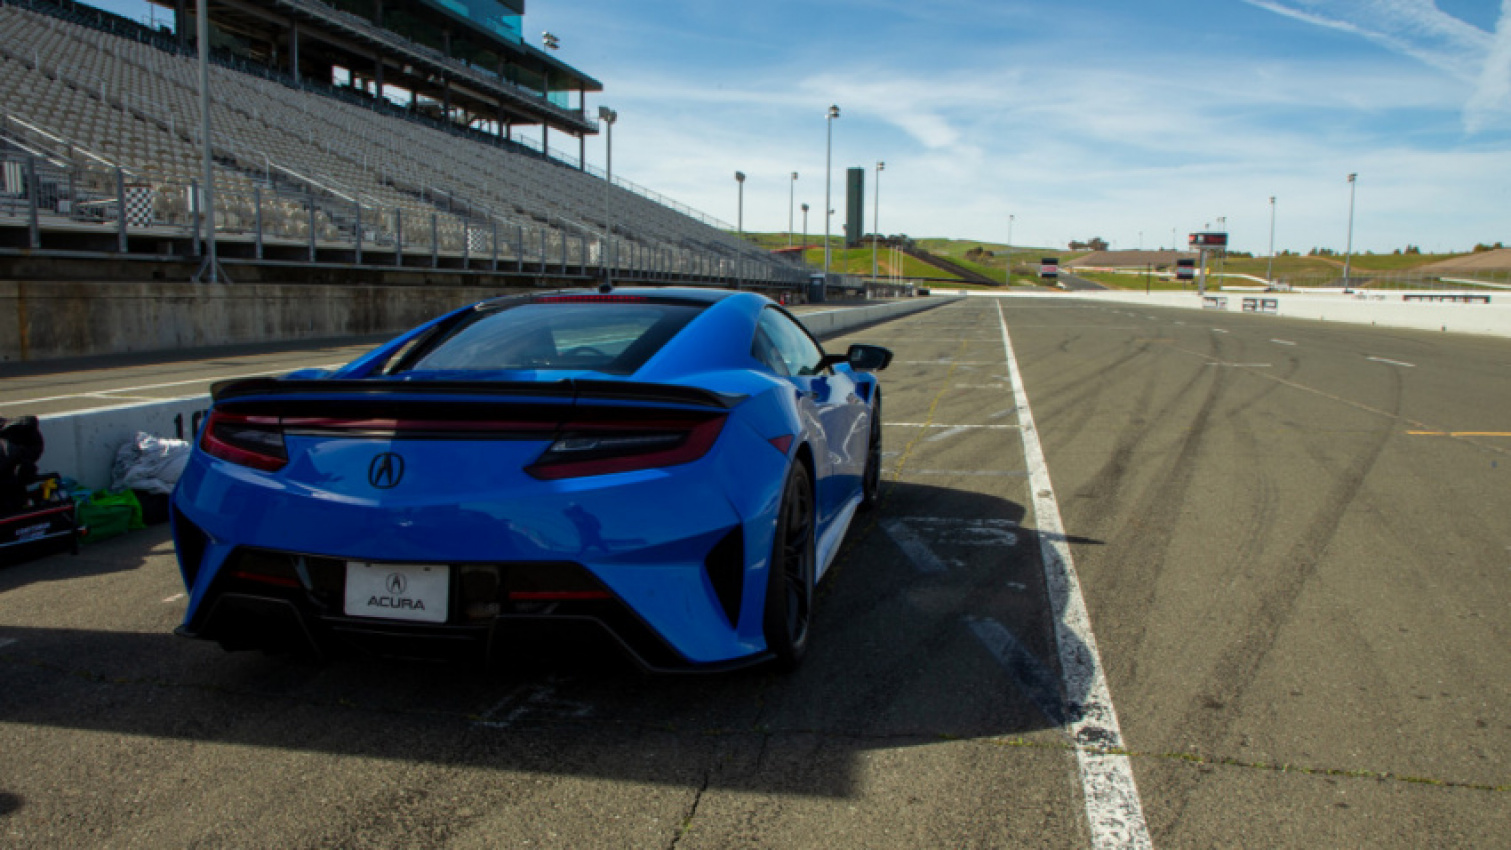 acura, autos, cars, acura news, acura nsx, acura nsx news, first drives, hybrids, monterey car week, performance, supercars, first drive review: 2022 acura nsx type s makes parting sweet sorrow